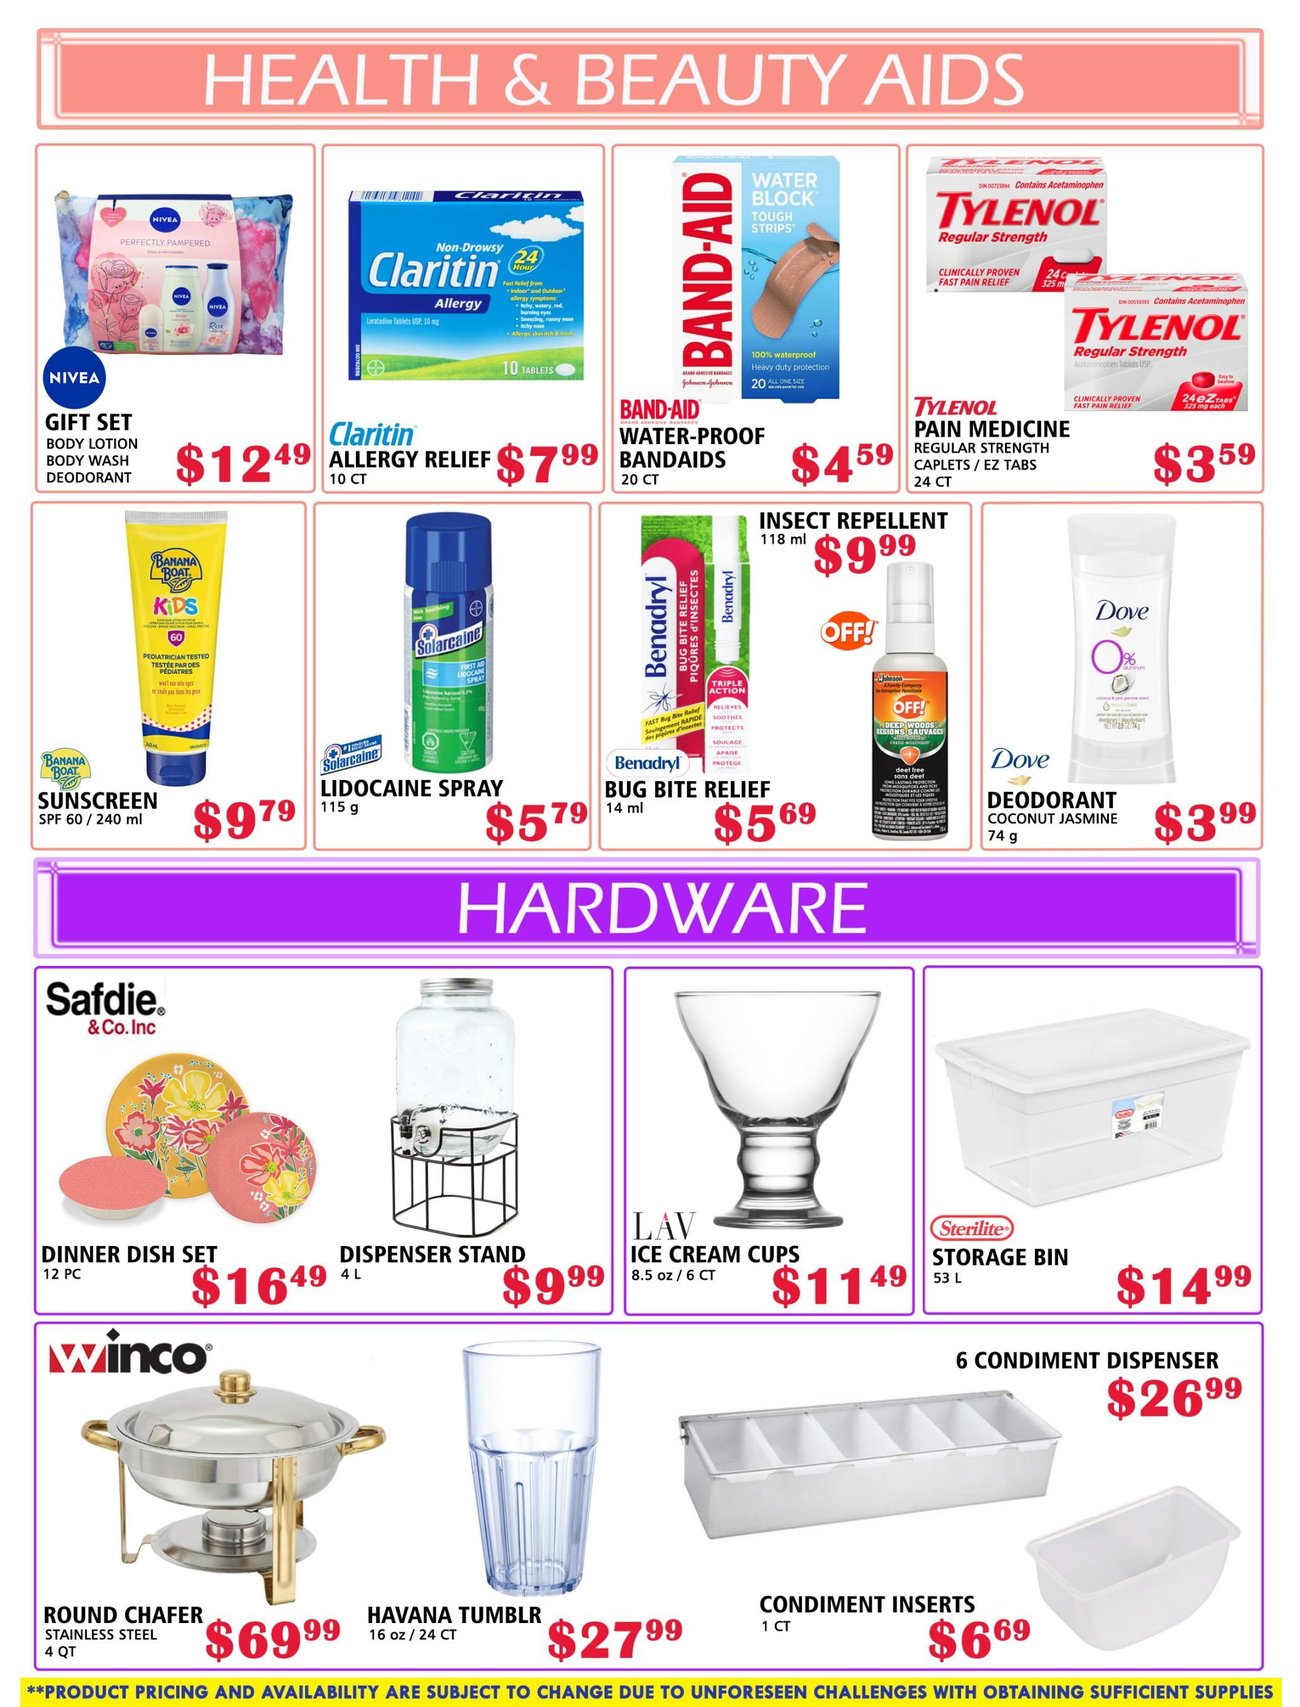 MVR Cash and Carry - Monthly Specials - Page 7